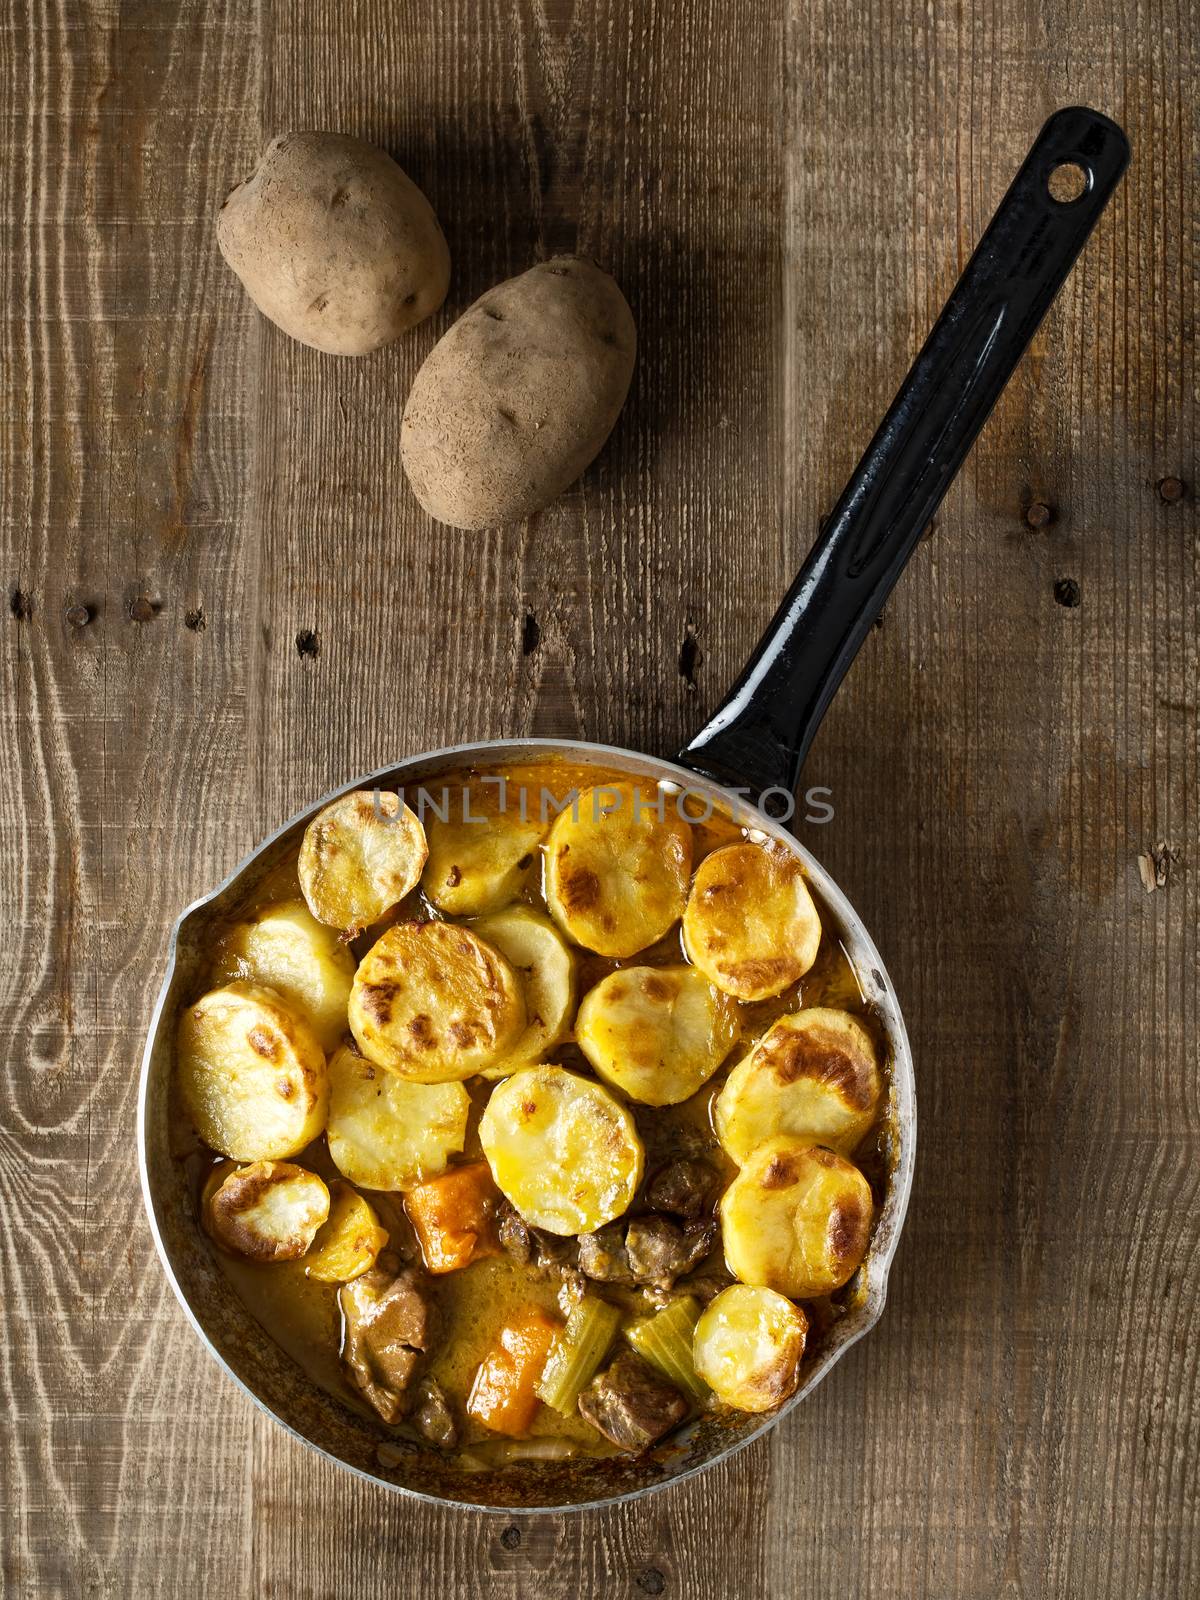 rustic english lancashire hotpot by zkruger